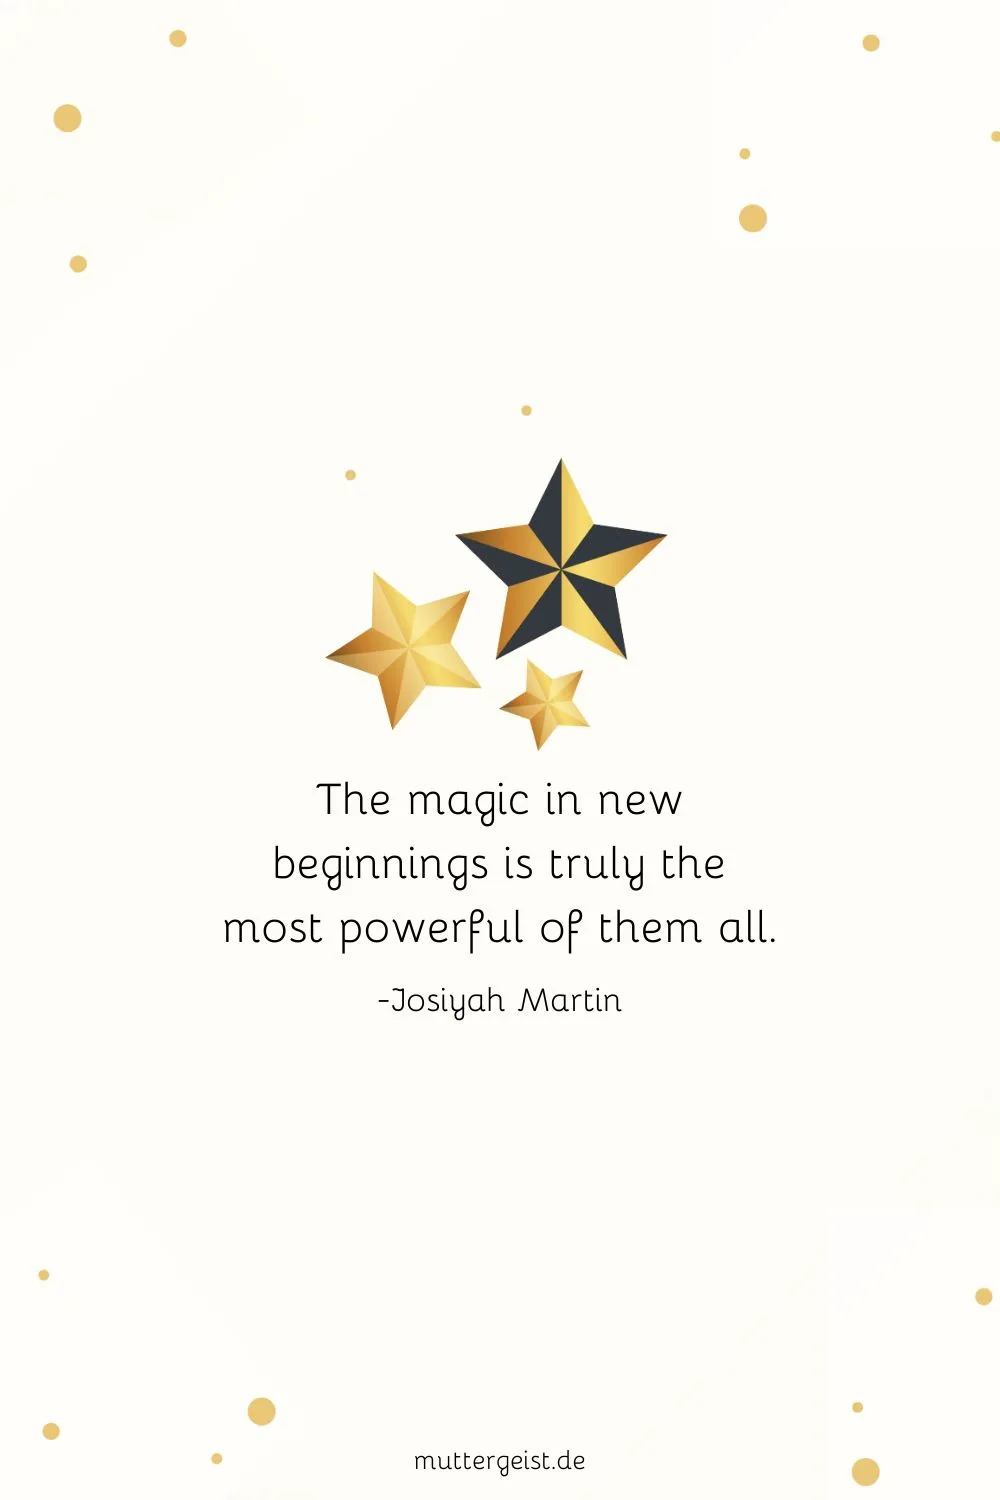 The magic in new beginnings is truly the most powerful of them all